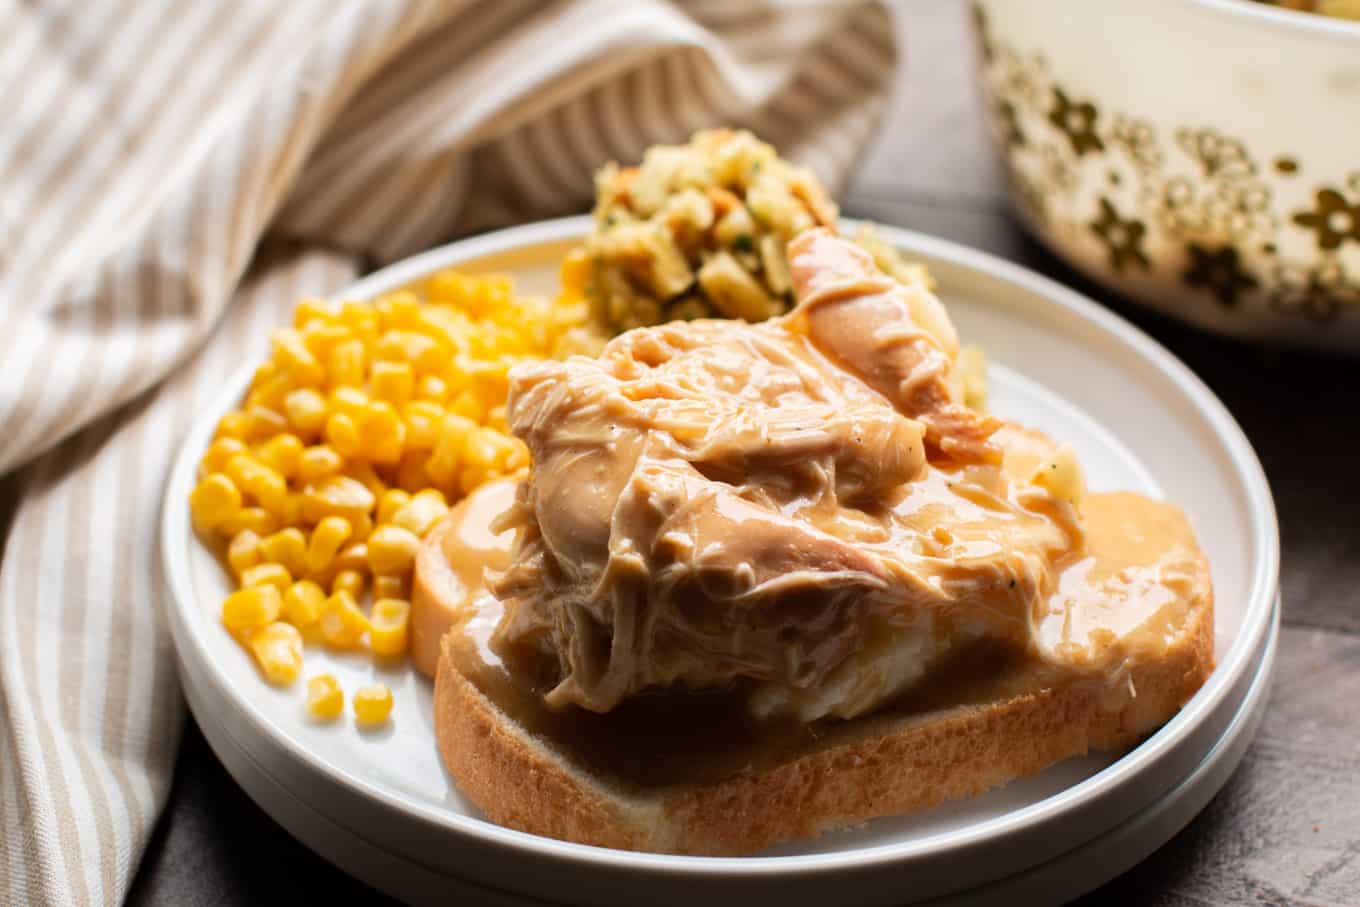 Close up of bread, mashed potatoes, chicken and gravy.